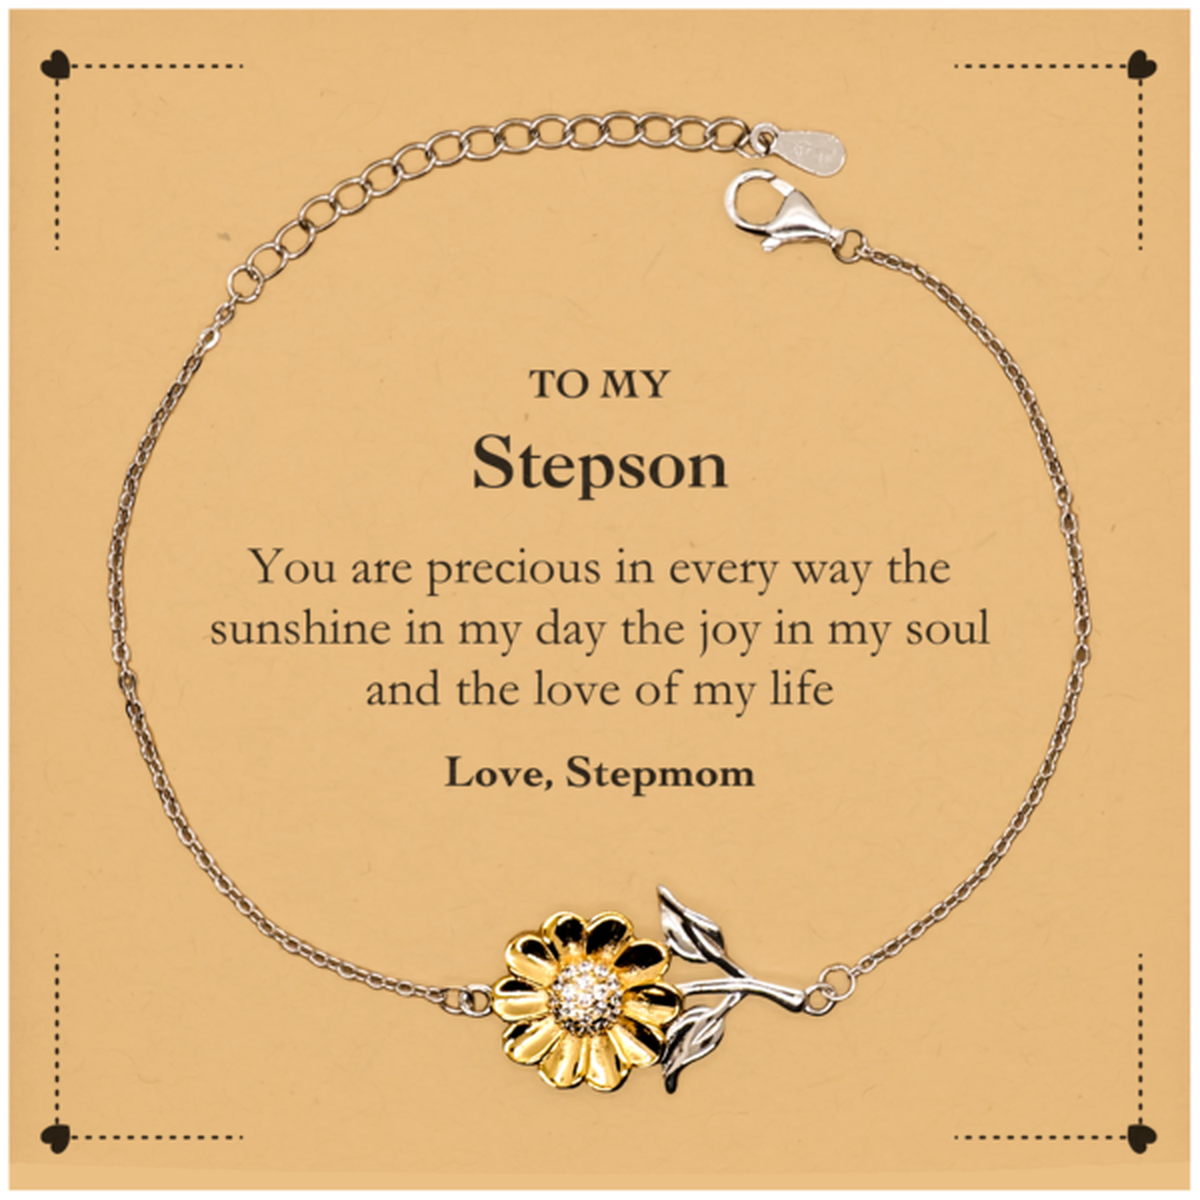 Graduation Gifts for Stepson Sunflower Bracelet Present from Stepmom, Christmas Stepson Birthday Gifts Stepson You are precious in every way the sunshine in my day. Love, Stepmom